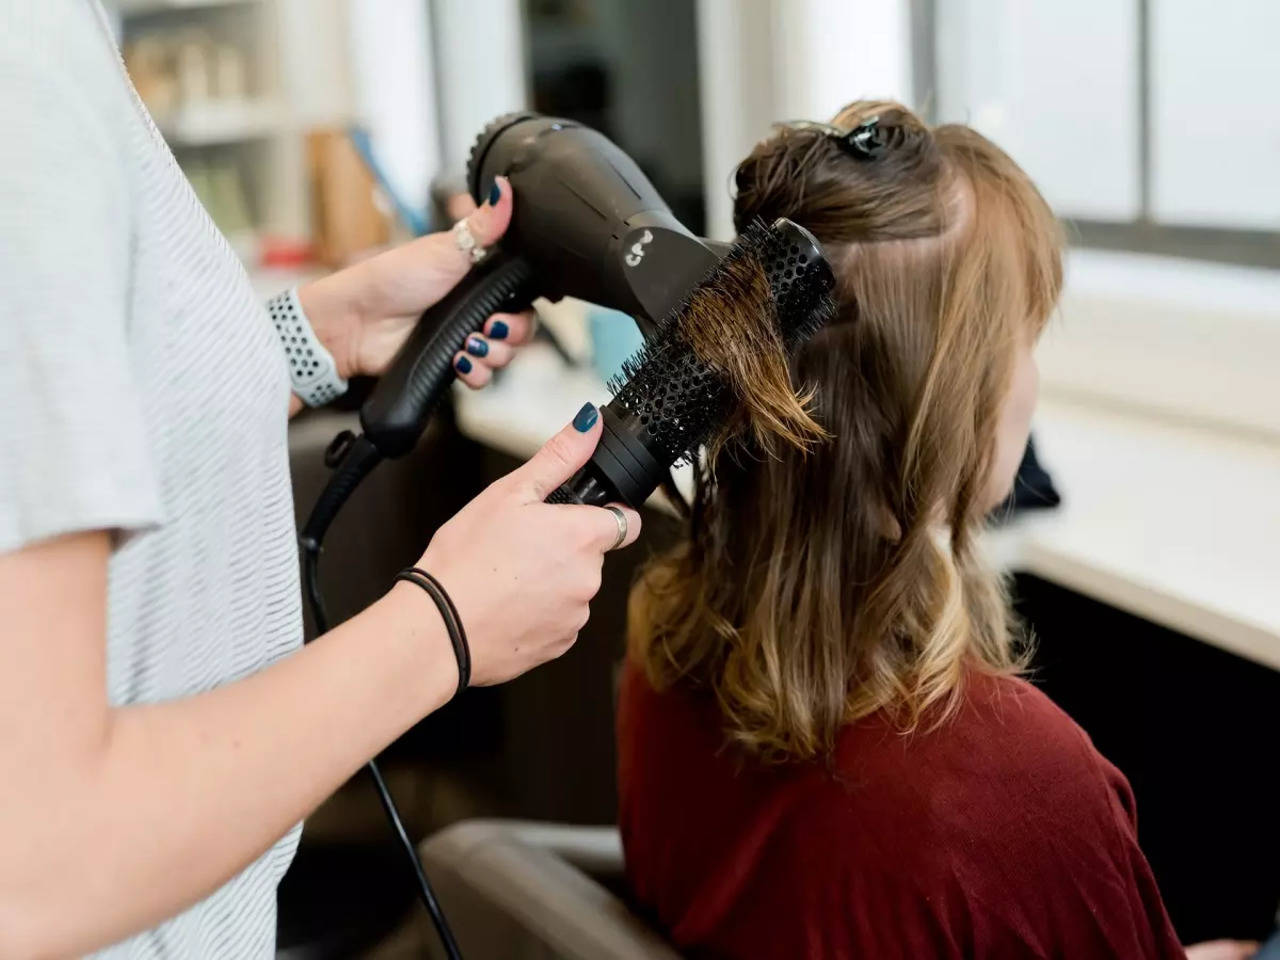 15 best hair dryers available in India that you should invest in now